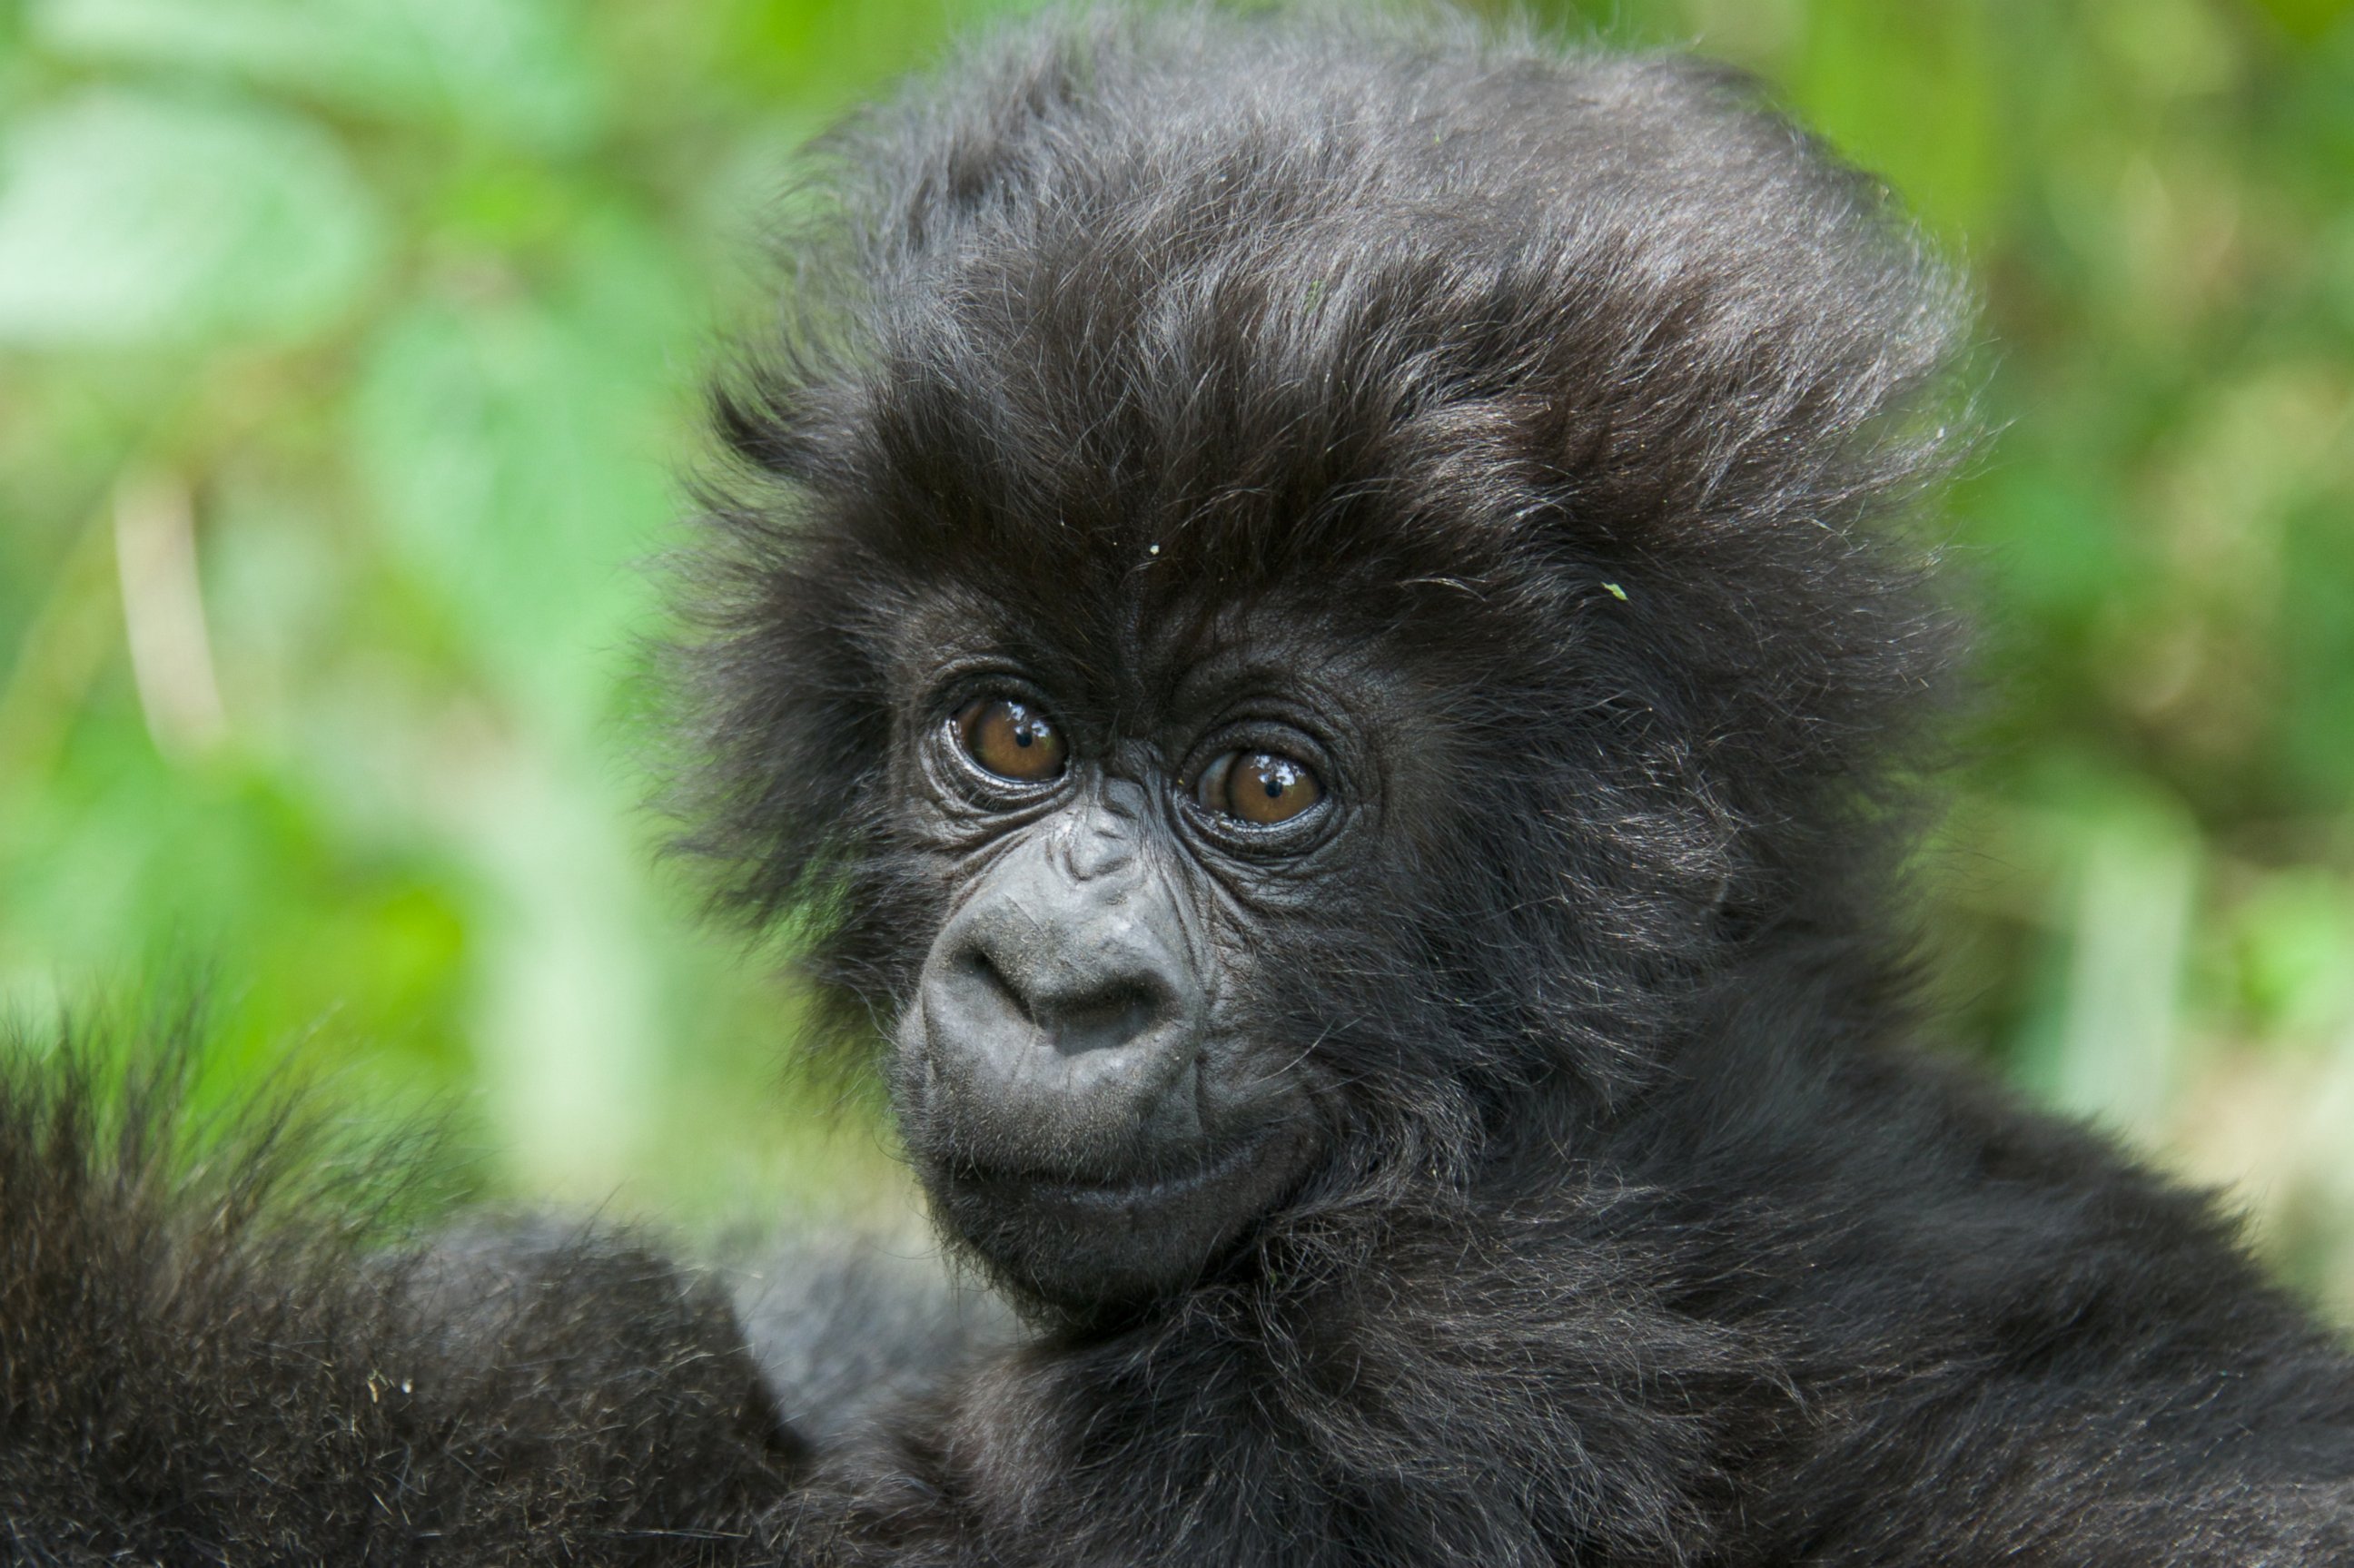 PHOTO: Mahane's baby gorilla is pictured. Rwanda named 24 new baby gorillas during the 11th Annual Gorilla Naming Ceremony, Kwita Izina, at the foothills of the Virunga Mountains.